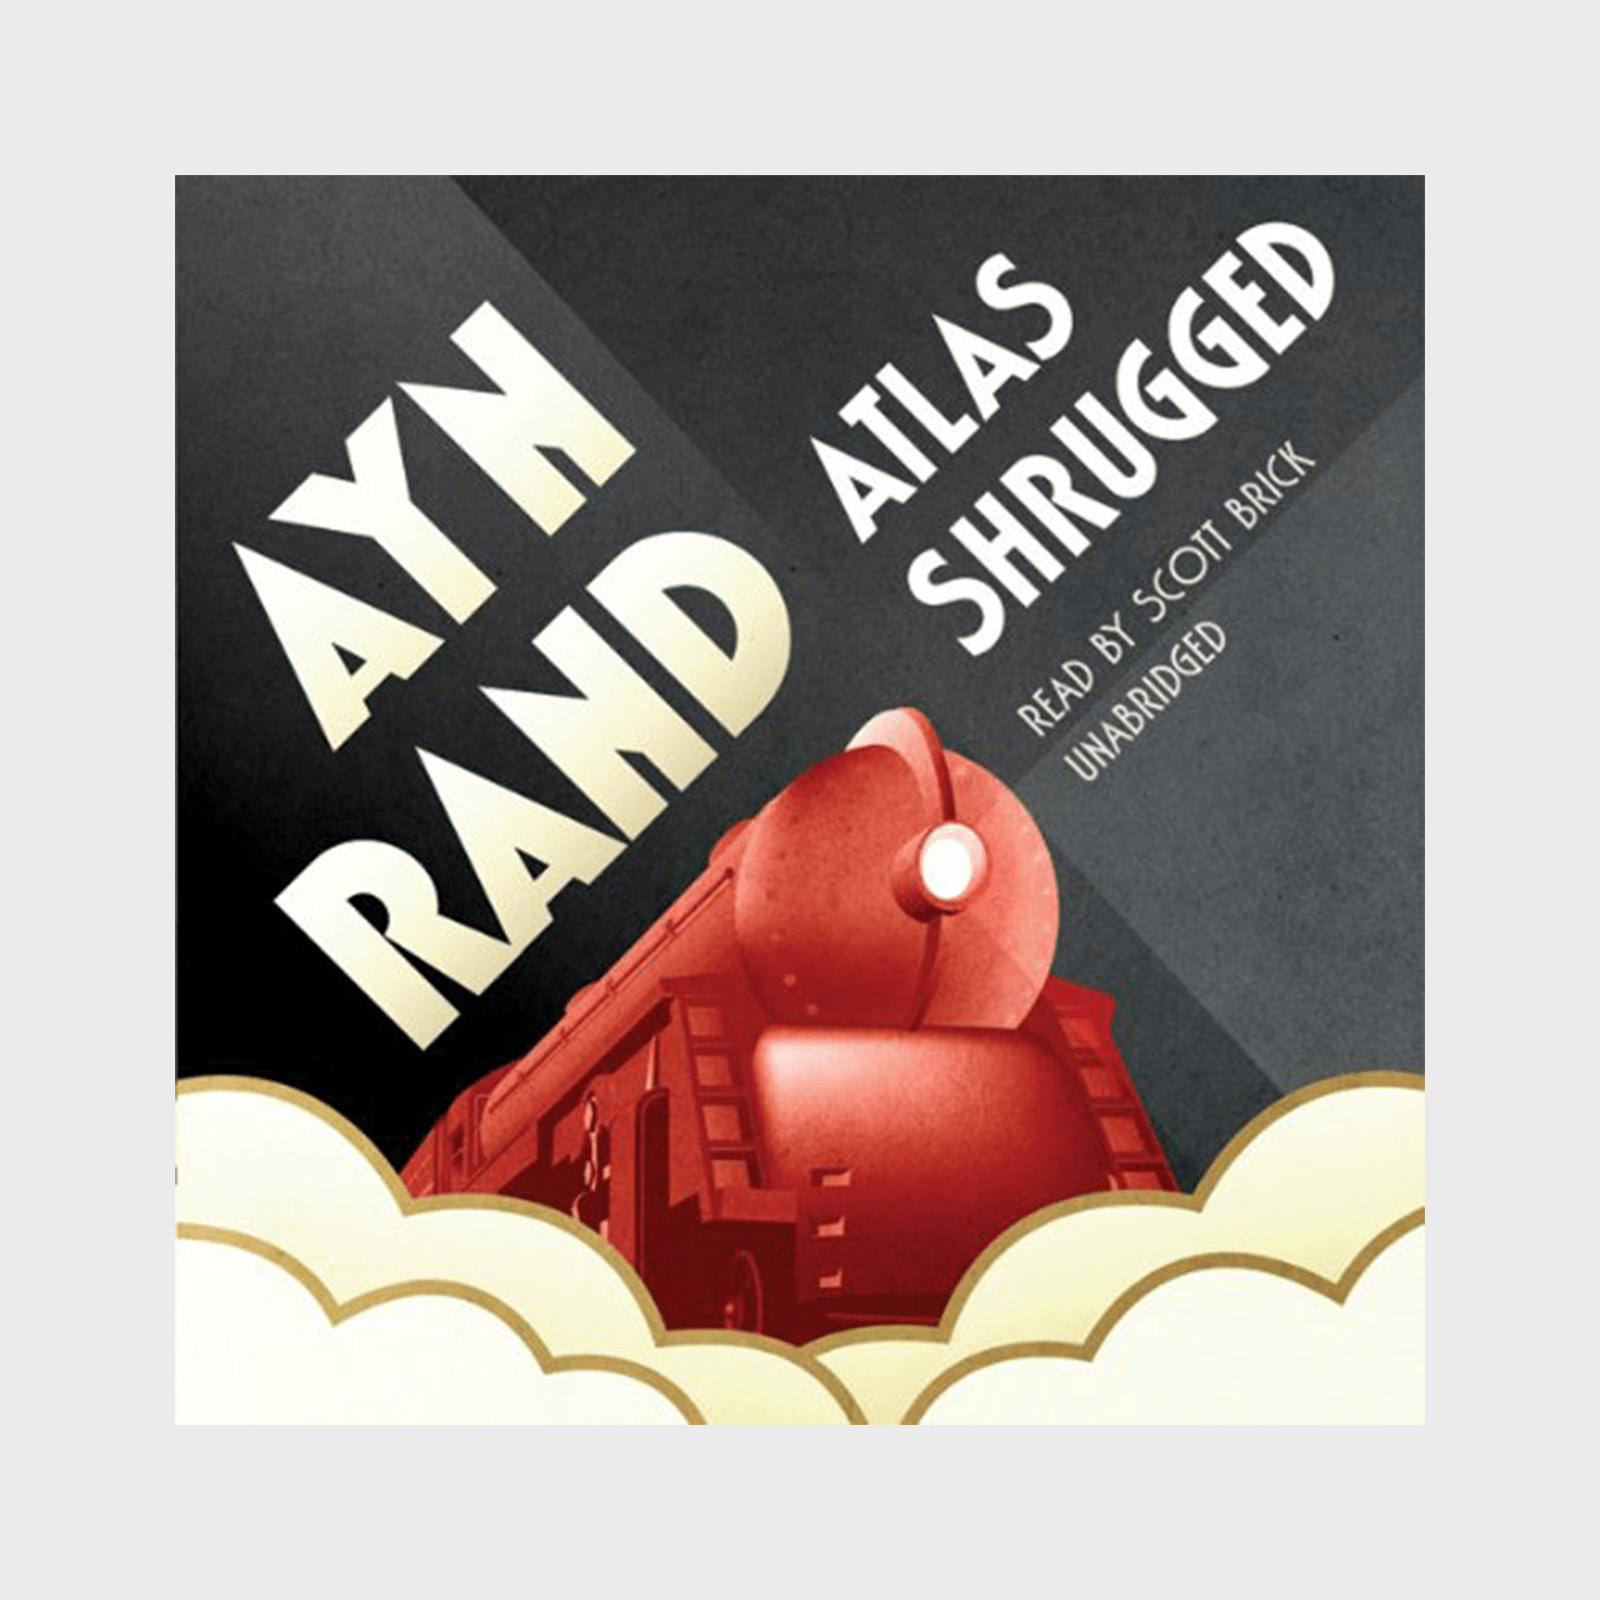 <h3><strong><em>Atlas Shrugged </em>by Ayn Rand</strong></h3> <p>If you've never read the classic dystopian novel <a href="https://www.amazon.com/Atlas-Shrugged-Ayn-Rand-audiobook/dp/B001MXQ7AQ/" rel="noopener noreferrer"><em>Atlas Shrugged</em></a> by controversial author Ayn Rand, now's the time. See (or, rather, hear) what happens when one man sets out to show what would happen to the world if all the heroes of innovation and industry went on strike. This book will challenge everything you think you know about economics, government, and morality, and ultimately leave you questioning your own world views. It's also one of the most notable <a href="https://www.rd.com/list/books-written-by-female-authors/" rel="noopener noreferrer">books written by female authors</a>.</p> <p class="listicle-page__cta-button-shop"><a class="shop-btn" href="https://www.amazon.com/Atlas-Shrugged-Ayn-Rand-audiobook/dp/B001MXQ7AQ/">Shop Now</a></p>